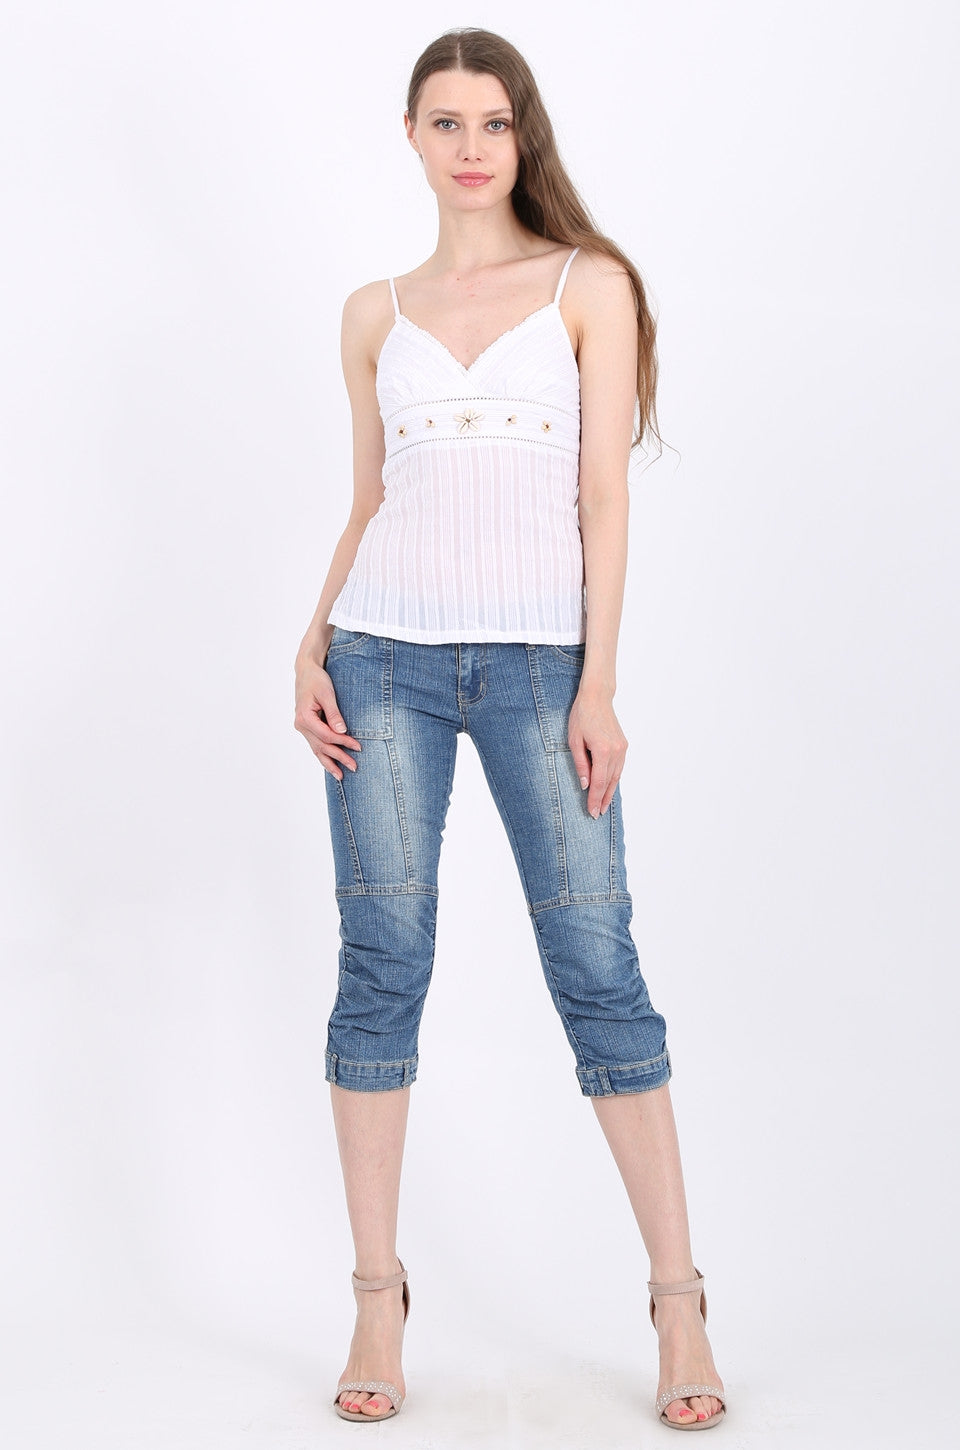 MISS PINKI Luciana Cropped Jeans in blue